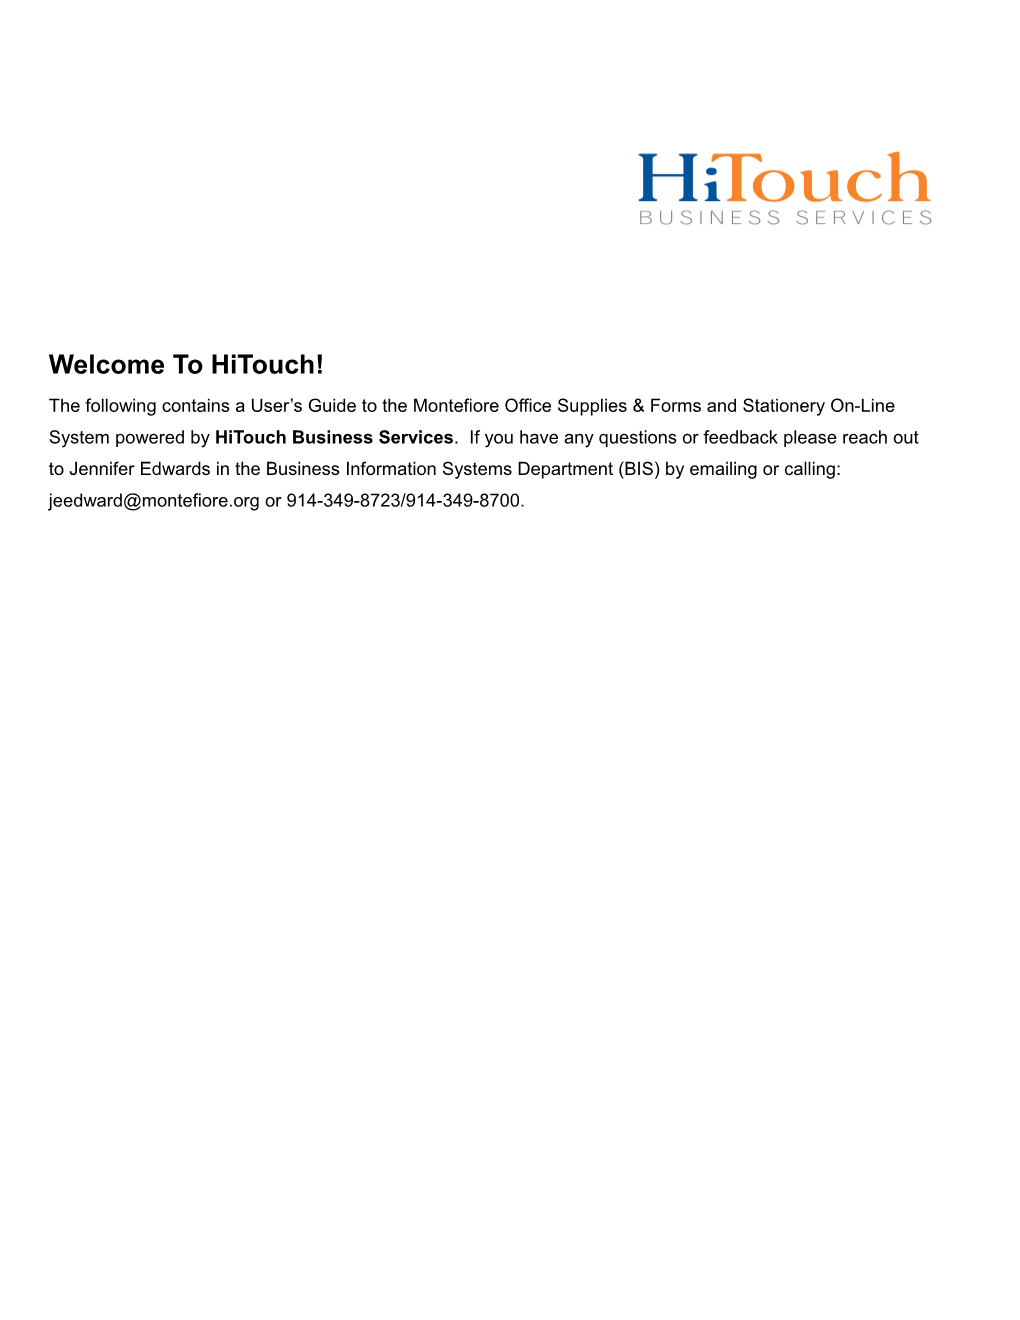 Welcome to Hitouch!